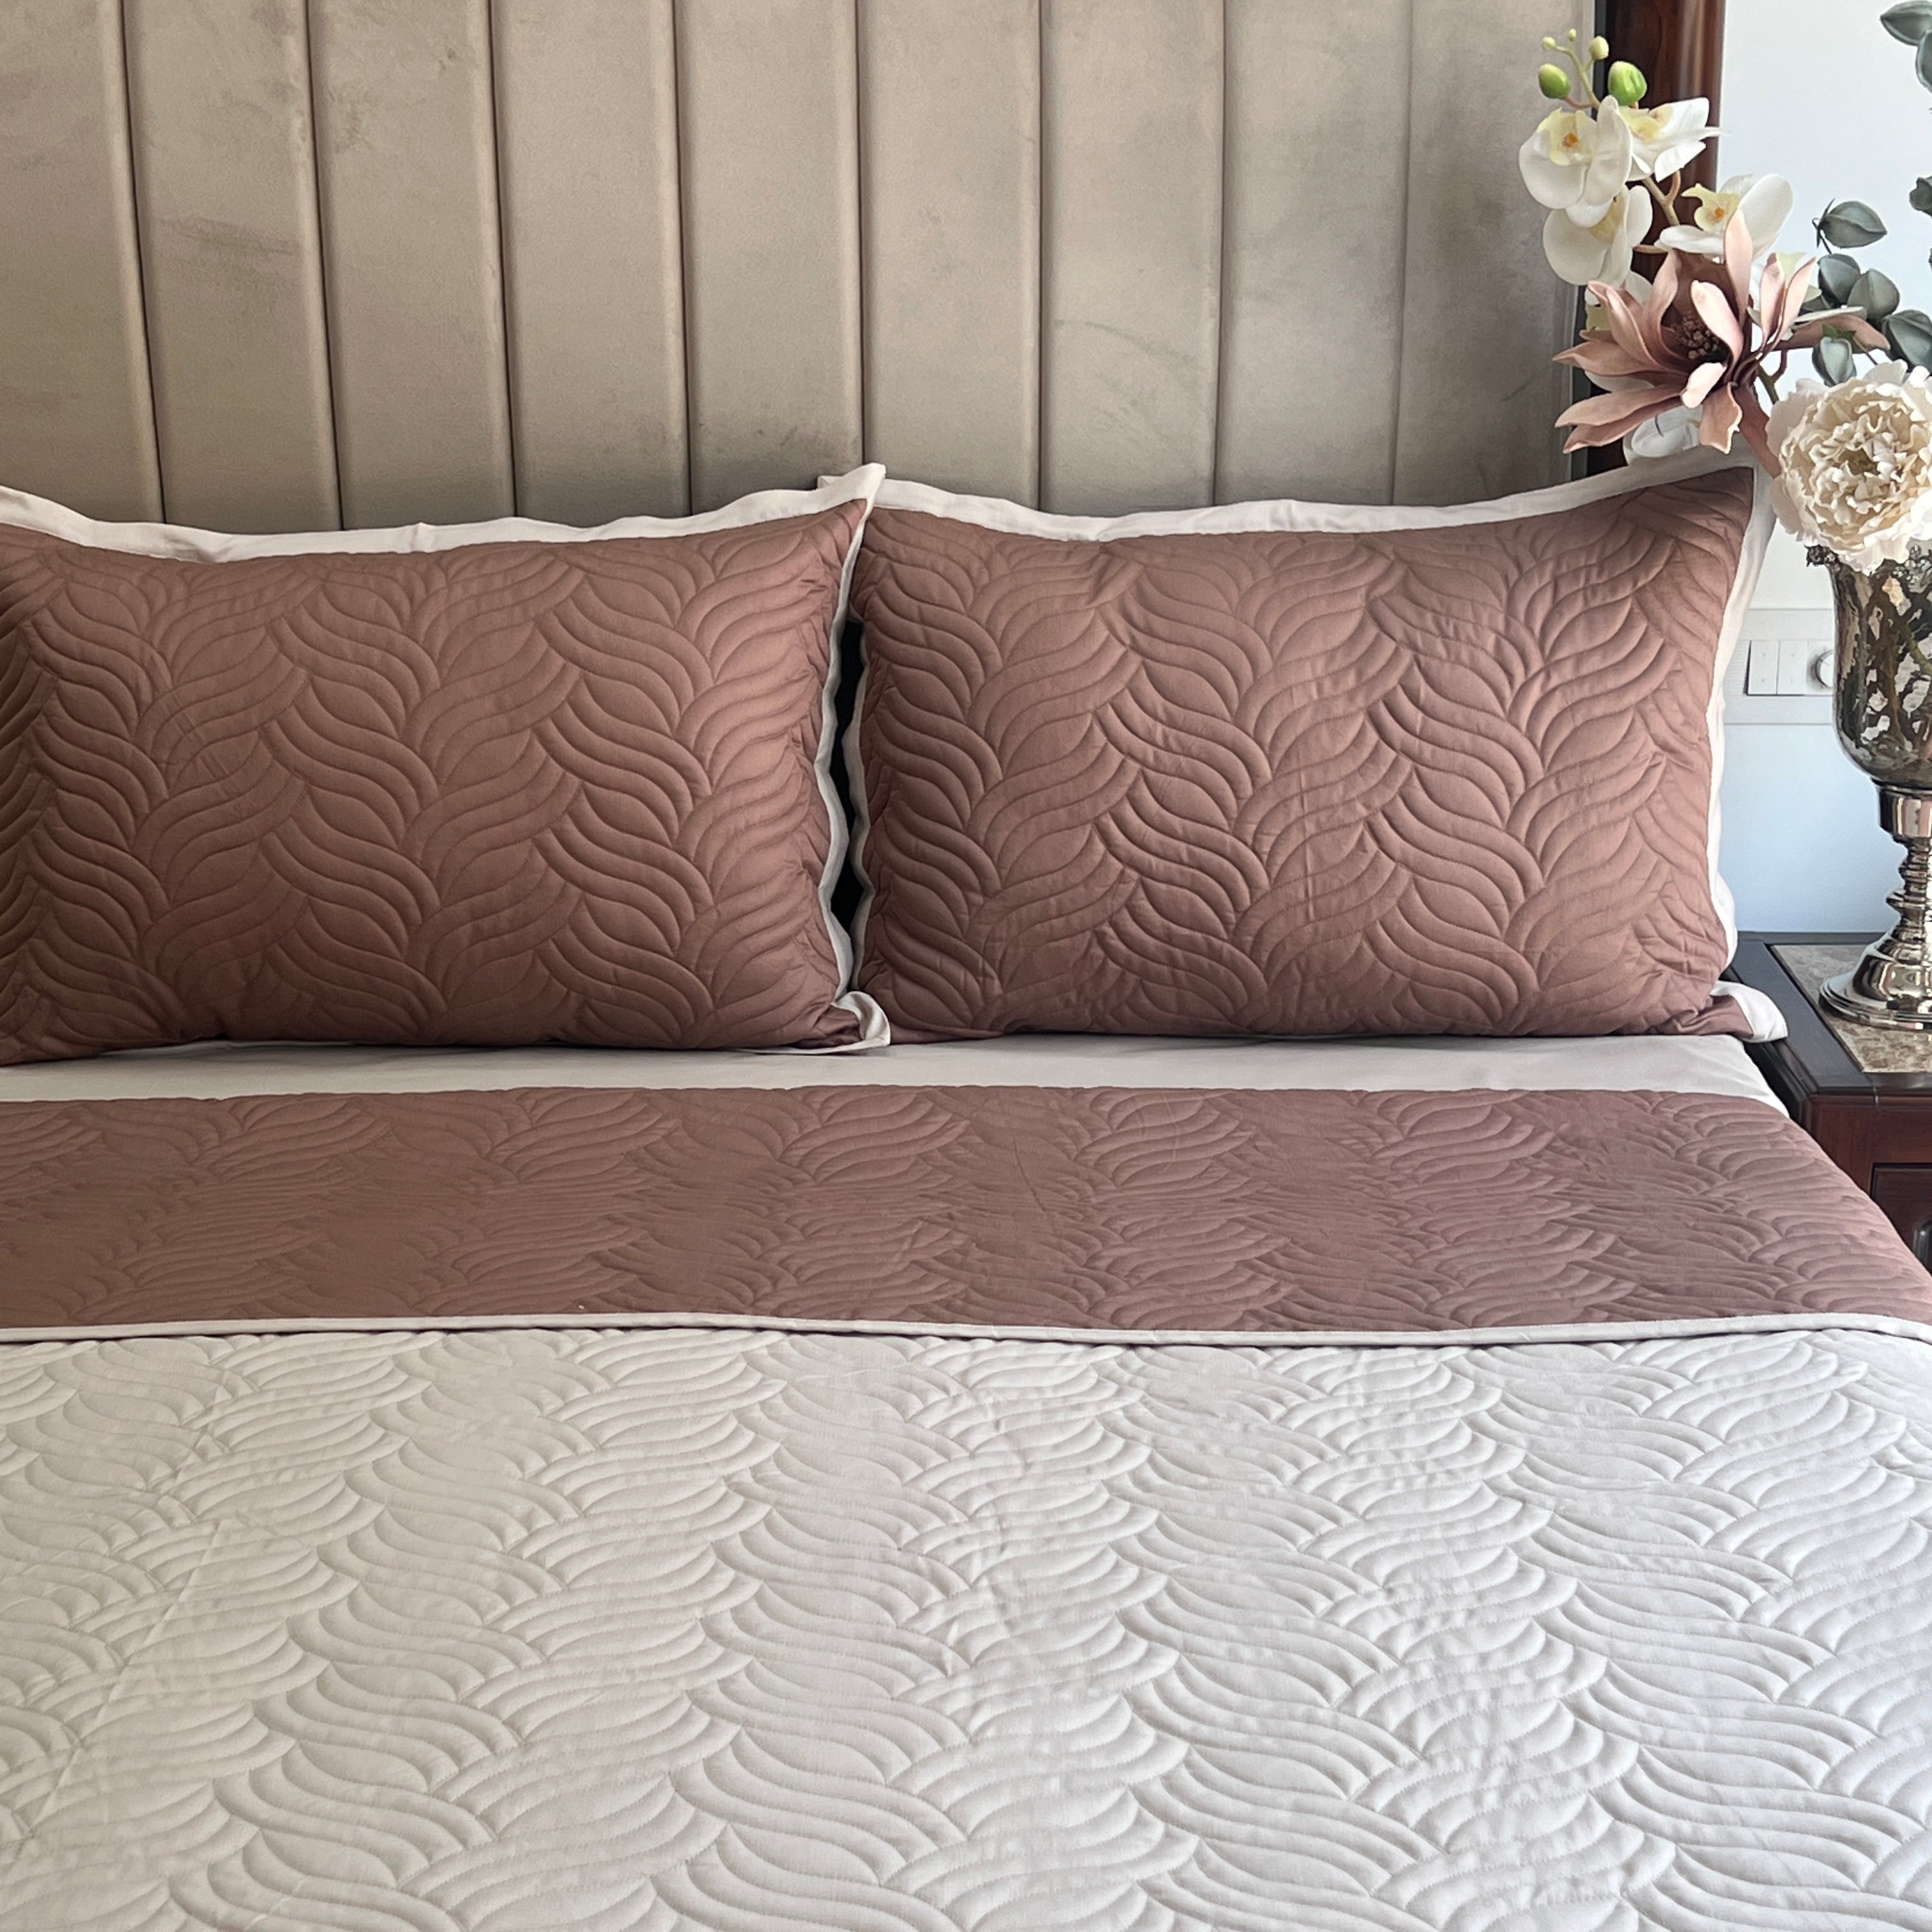 Quilted Brandy Rose and Beige Comber Reversible Bedspread